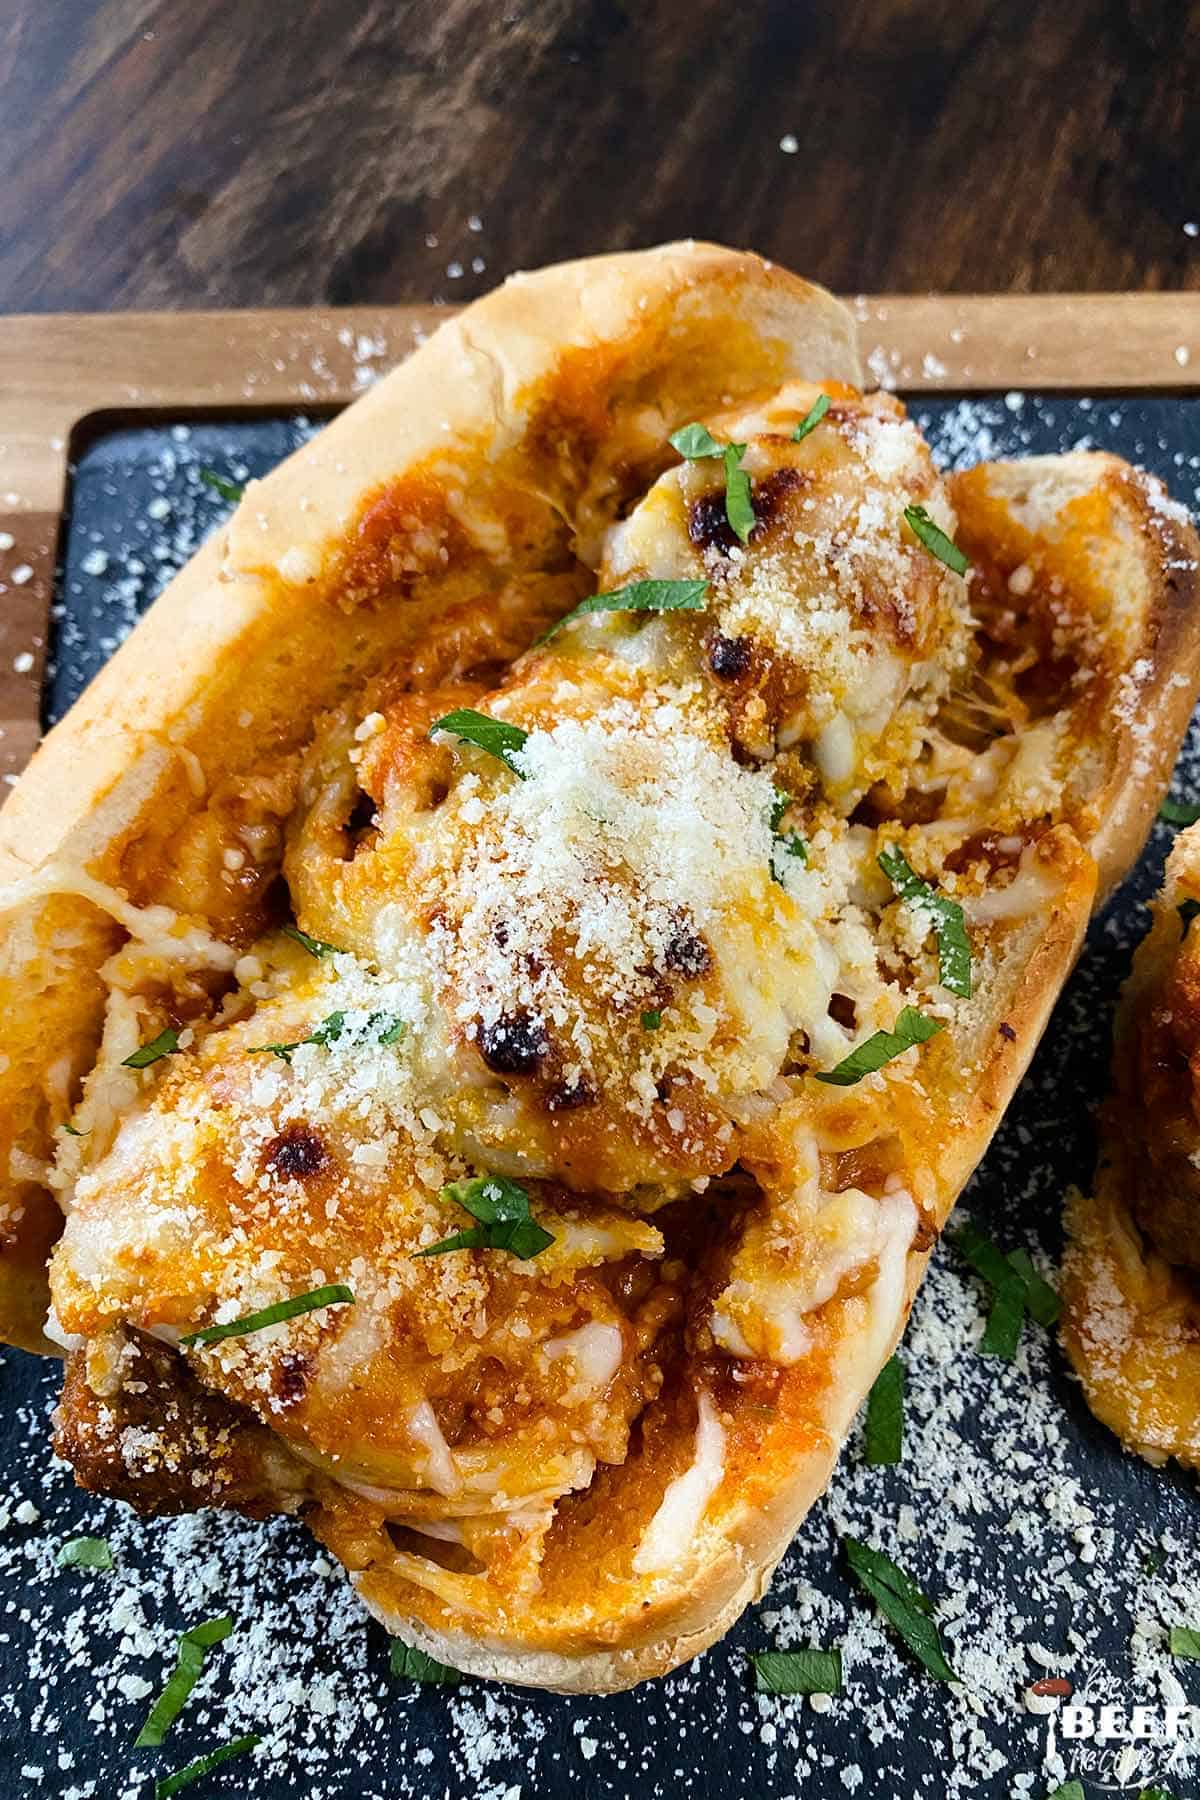 Meatball sandwich with baked cheese on top